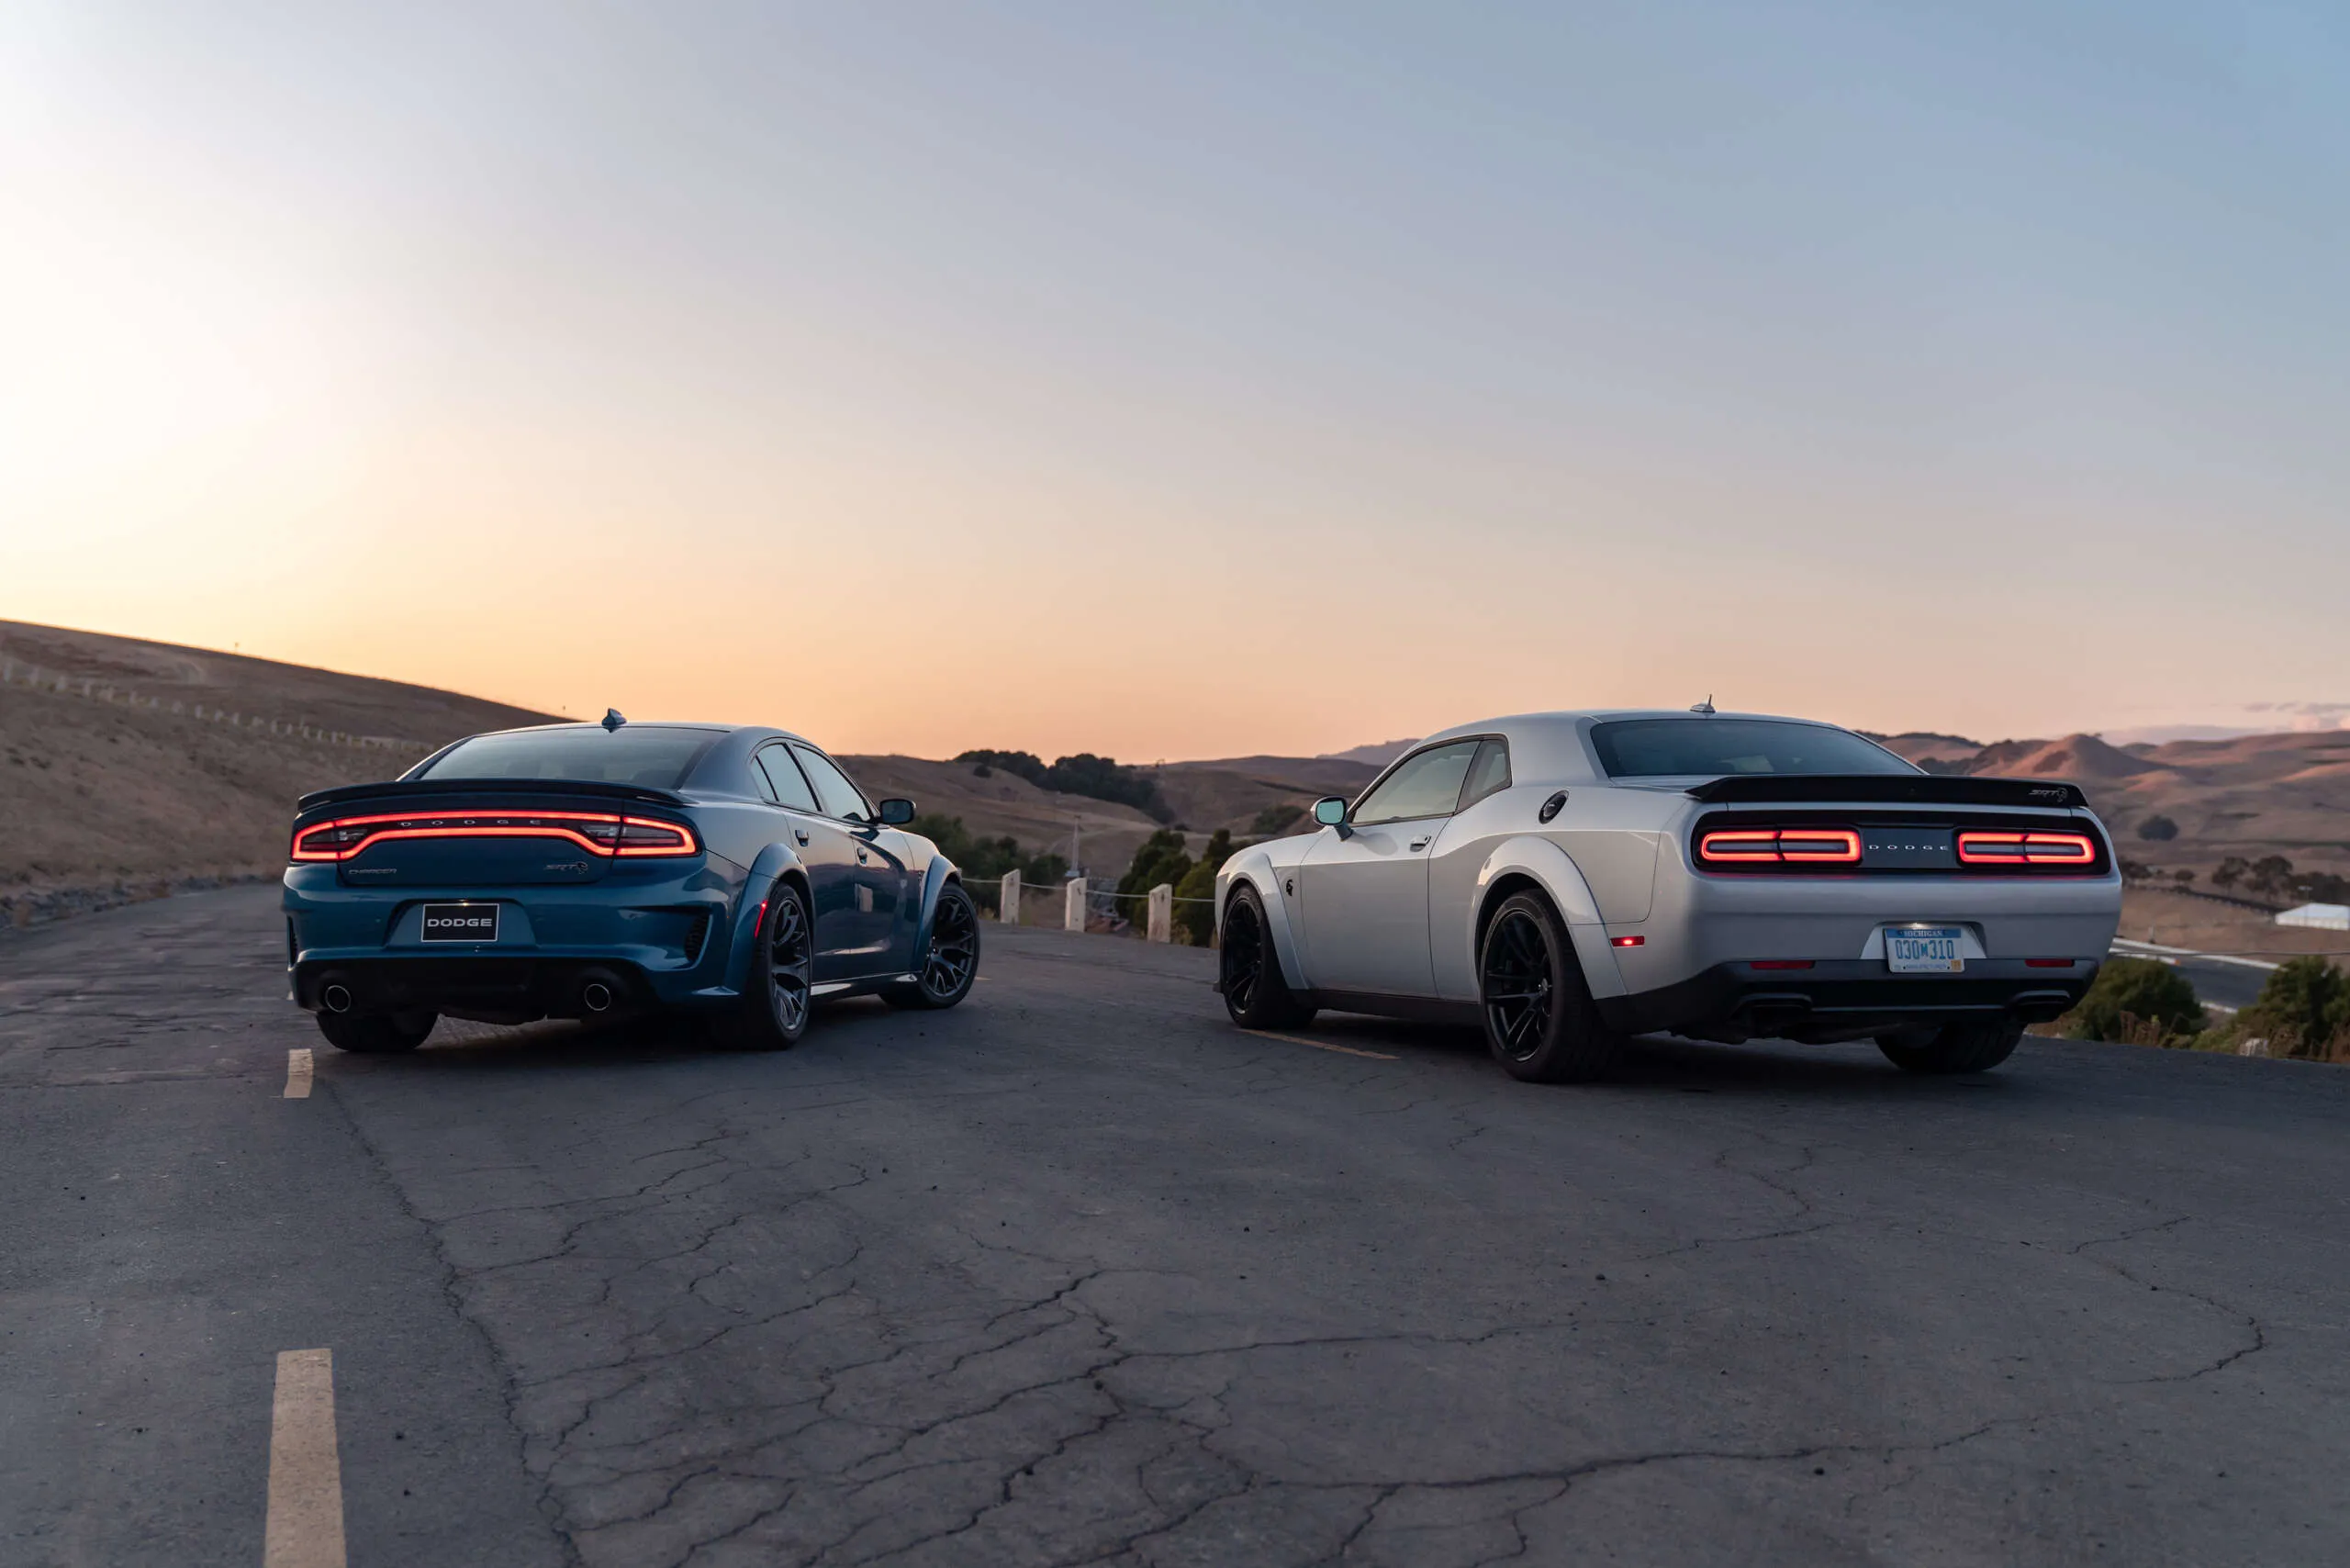 The Complete 2022 Dodge Lineup